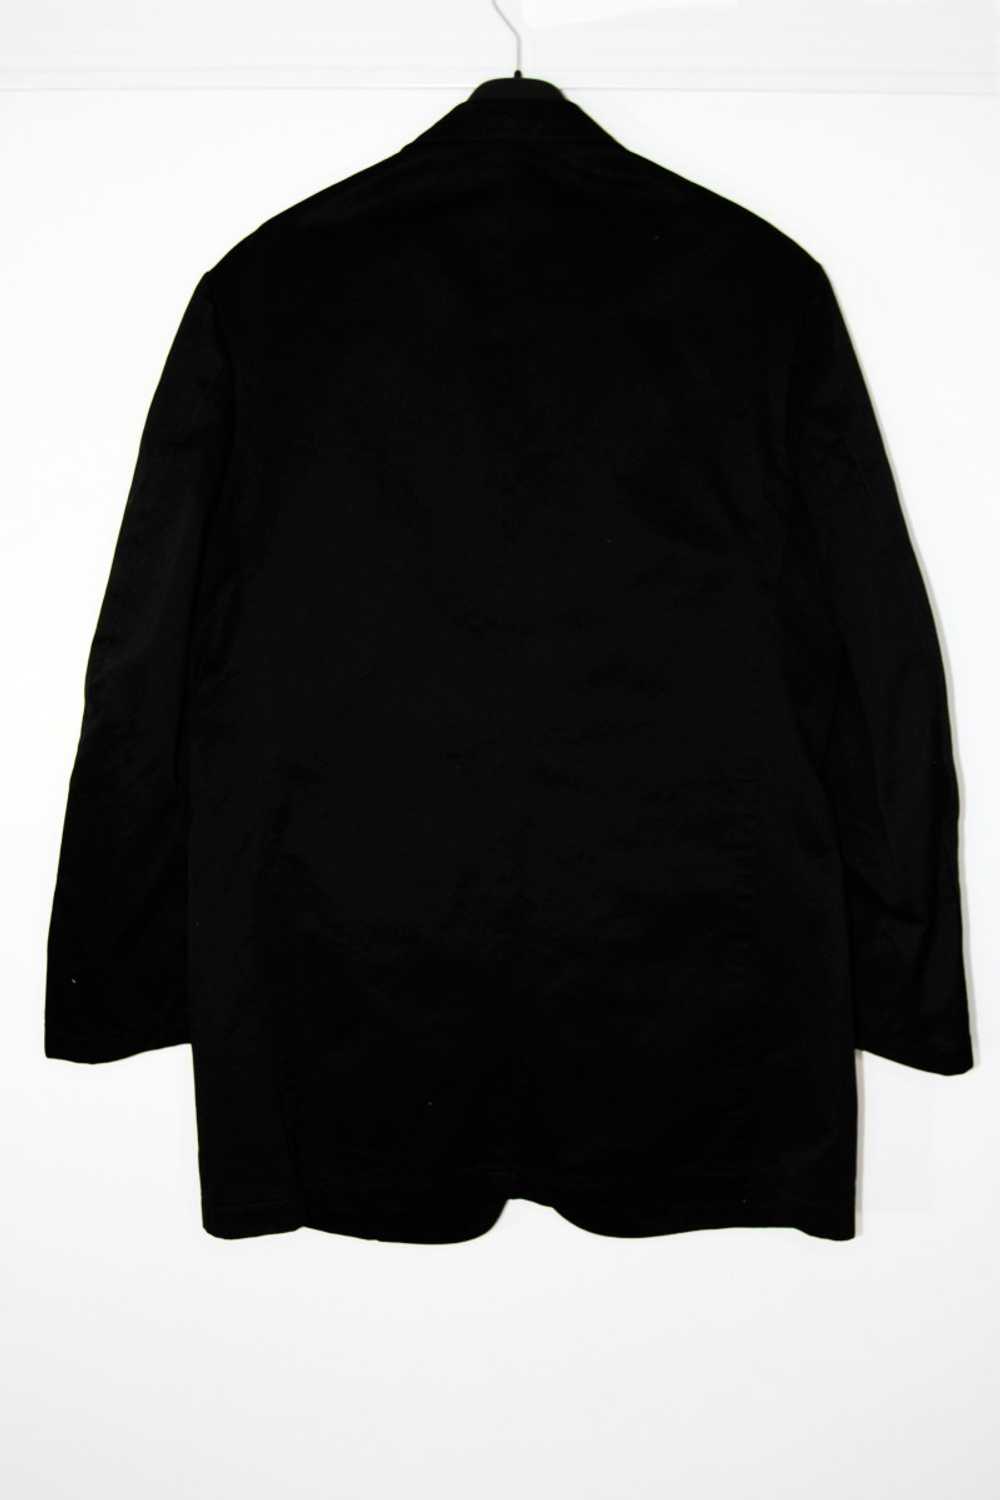 SS03 YOHJI YAMAMOTO POUR HOMME EMBROIDERED FLOWER… - image 3